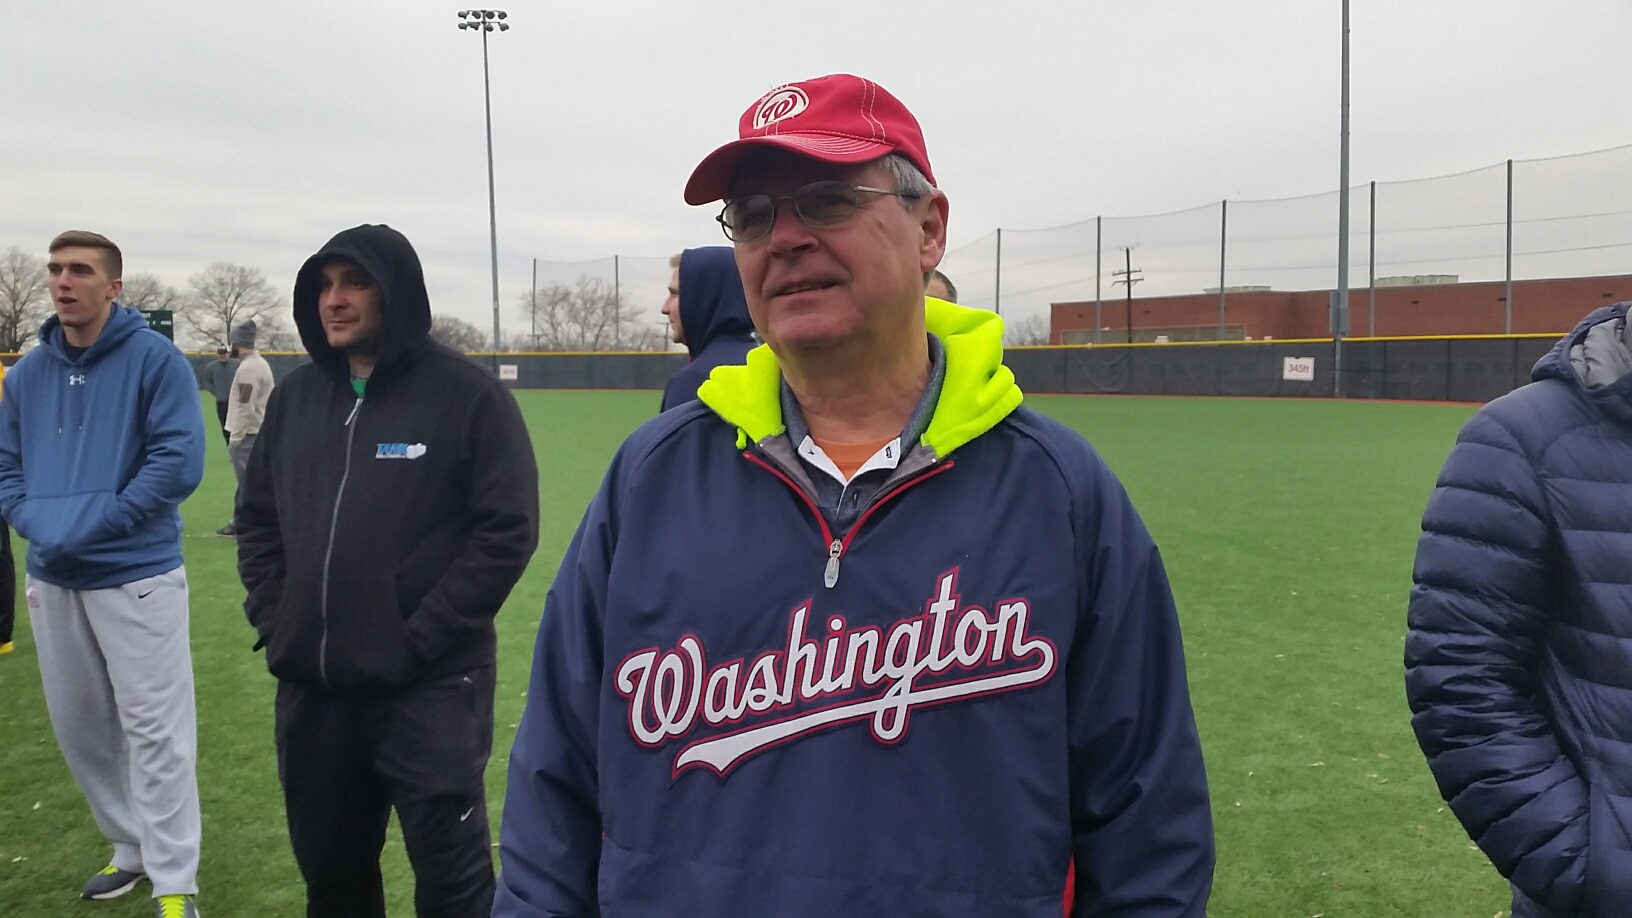 Rick, a resident of Virginia, tries out for the Washington Nationals Racing Presidents on Sunday, Jan. 17, 2016. (WTOP/Kathy Stewart)